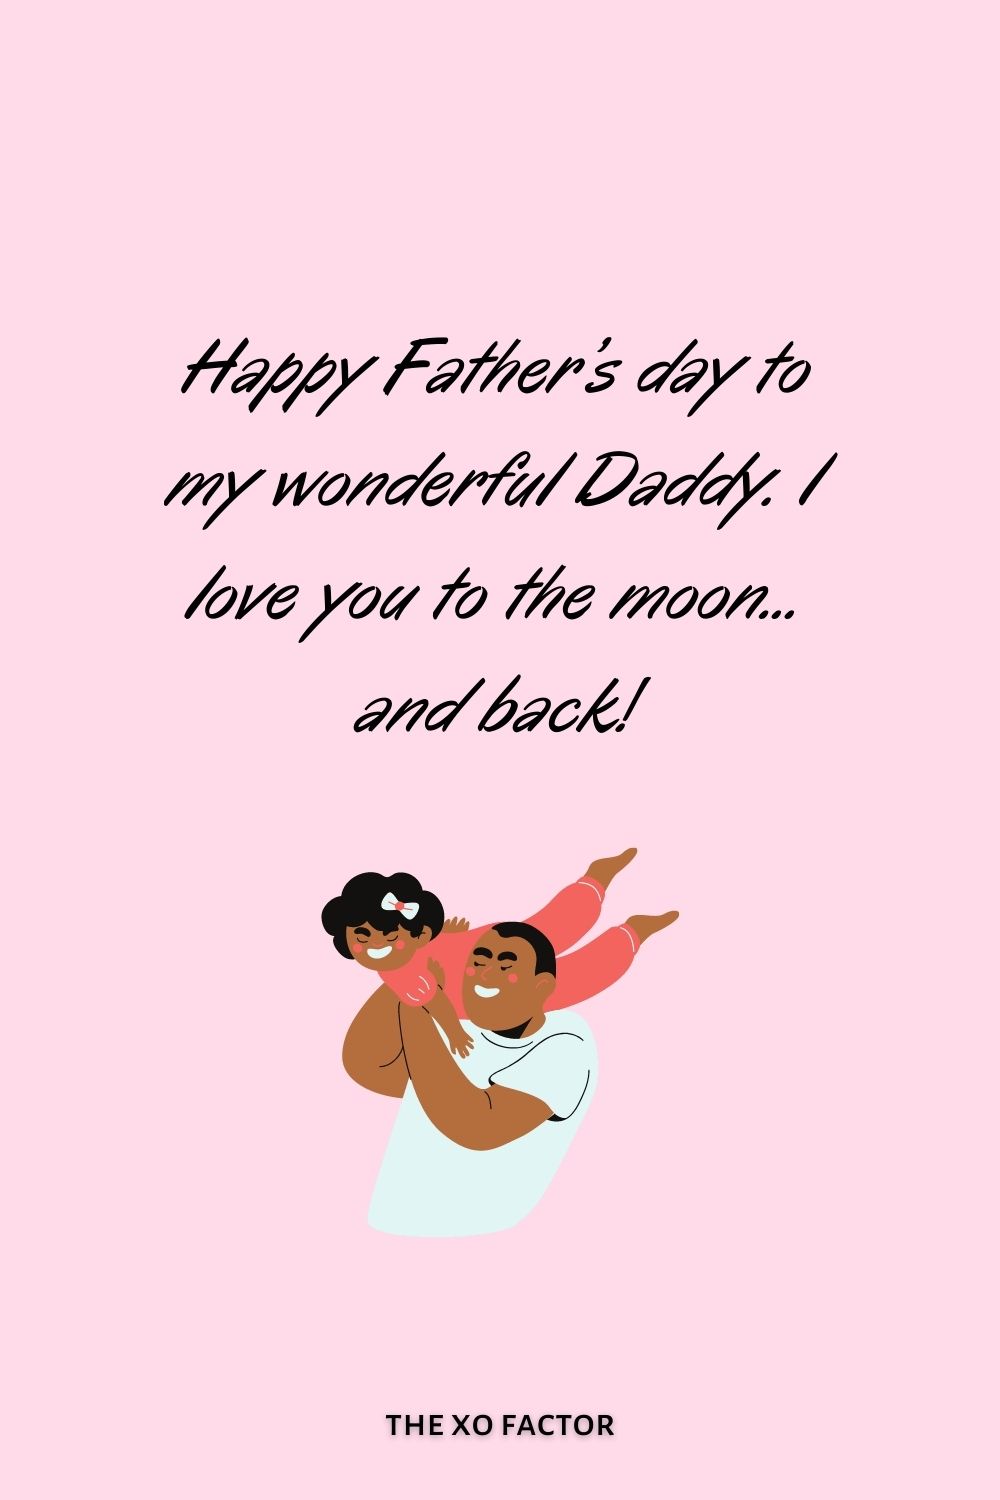 Happy Father’s day to my wonderful Daddy. I love you to the moon... and back!